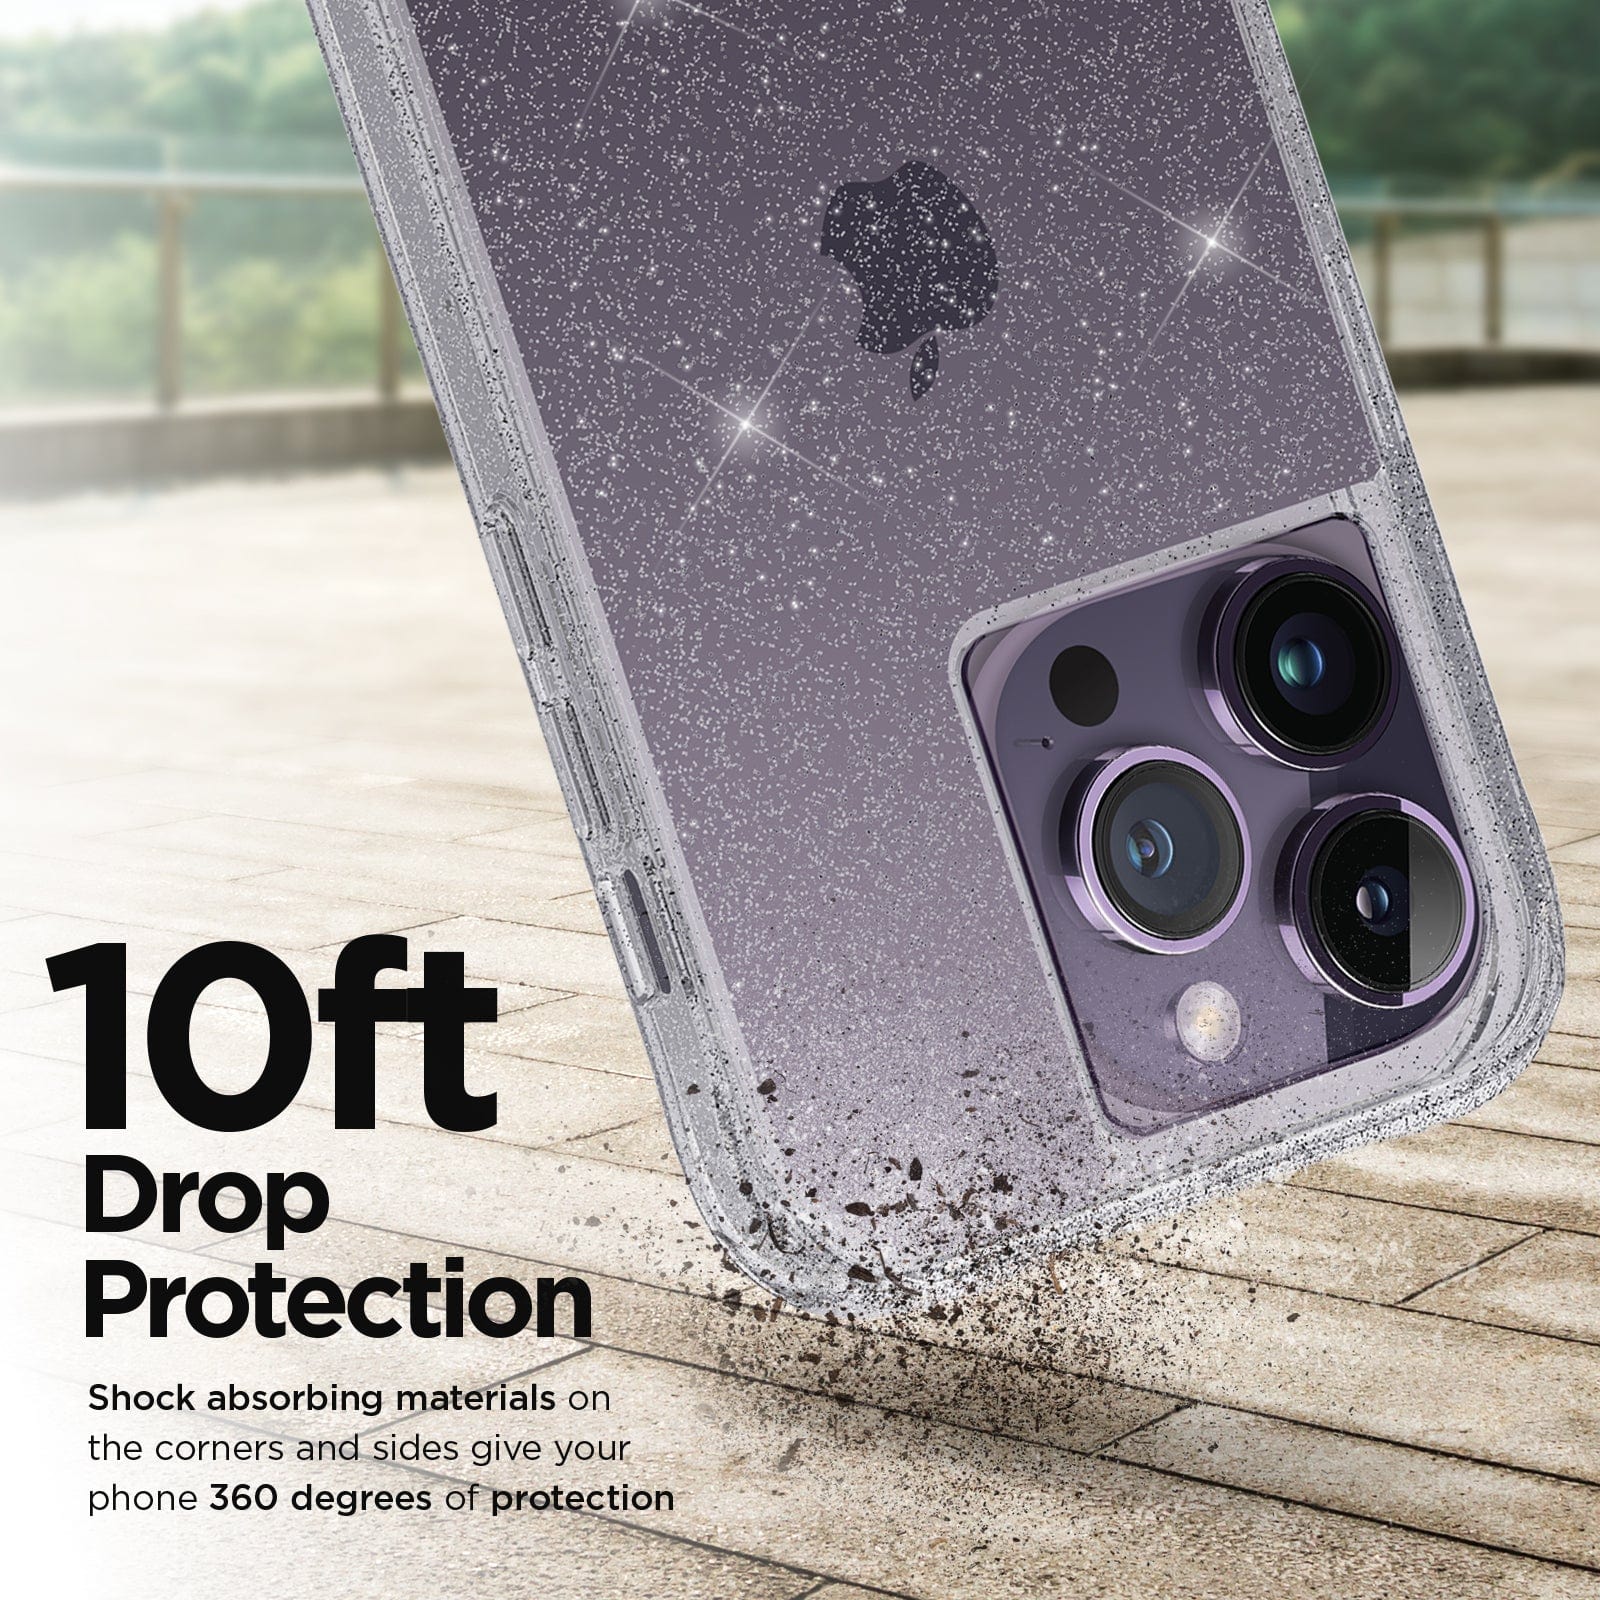 10FT DROP PROTECTION. SHOCK ABSORBING MATERIALS ON THE CORNERS AND ASIDES GIVE YOUR PHONE 360 DEGREES OF PROTECTION.